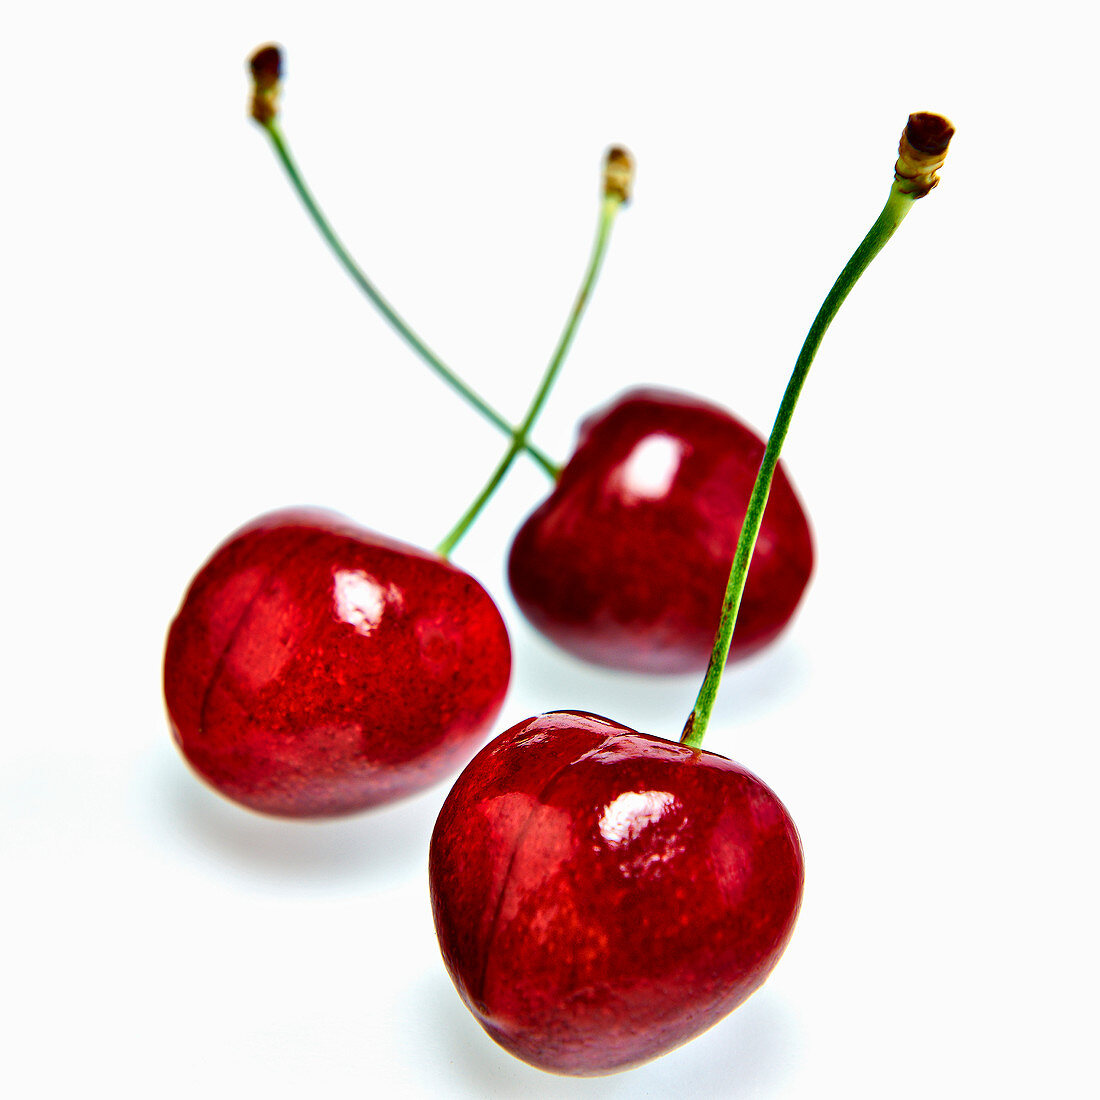 Three cherries in front of a white background